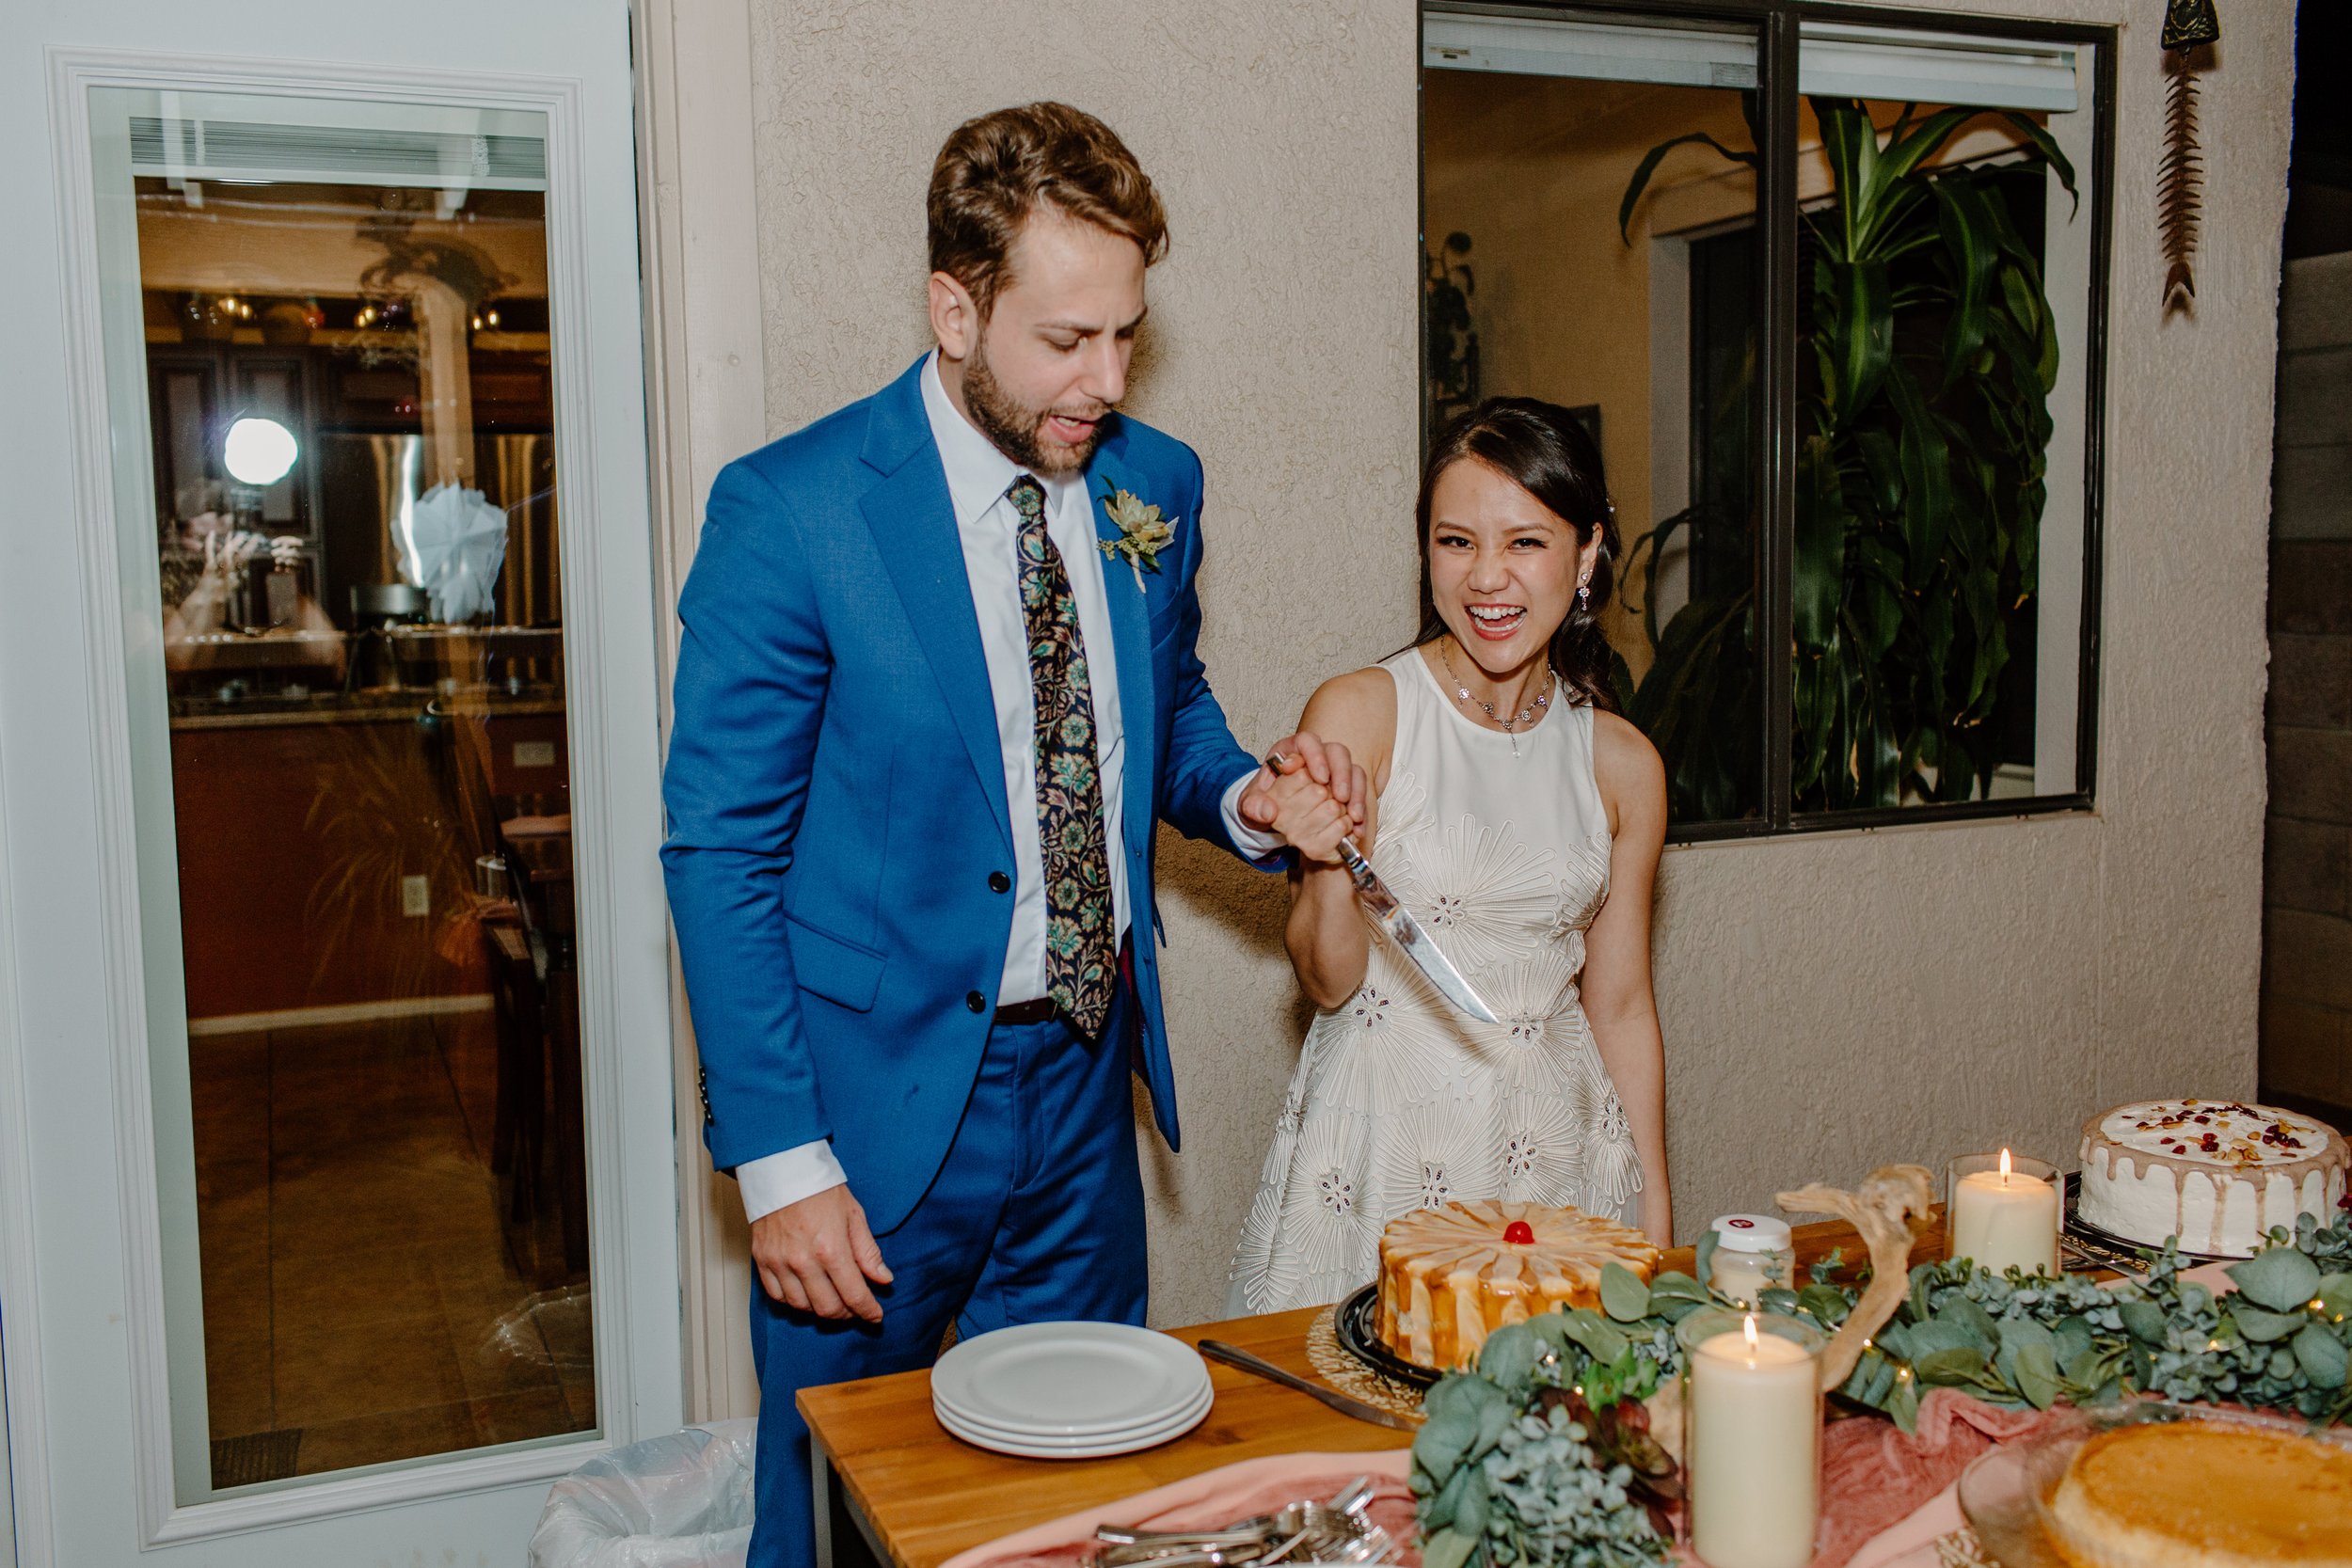  newly married couple cut wedding cake at reception by Arizona elopement photographer 